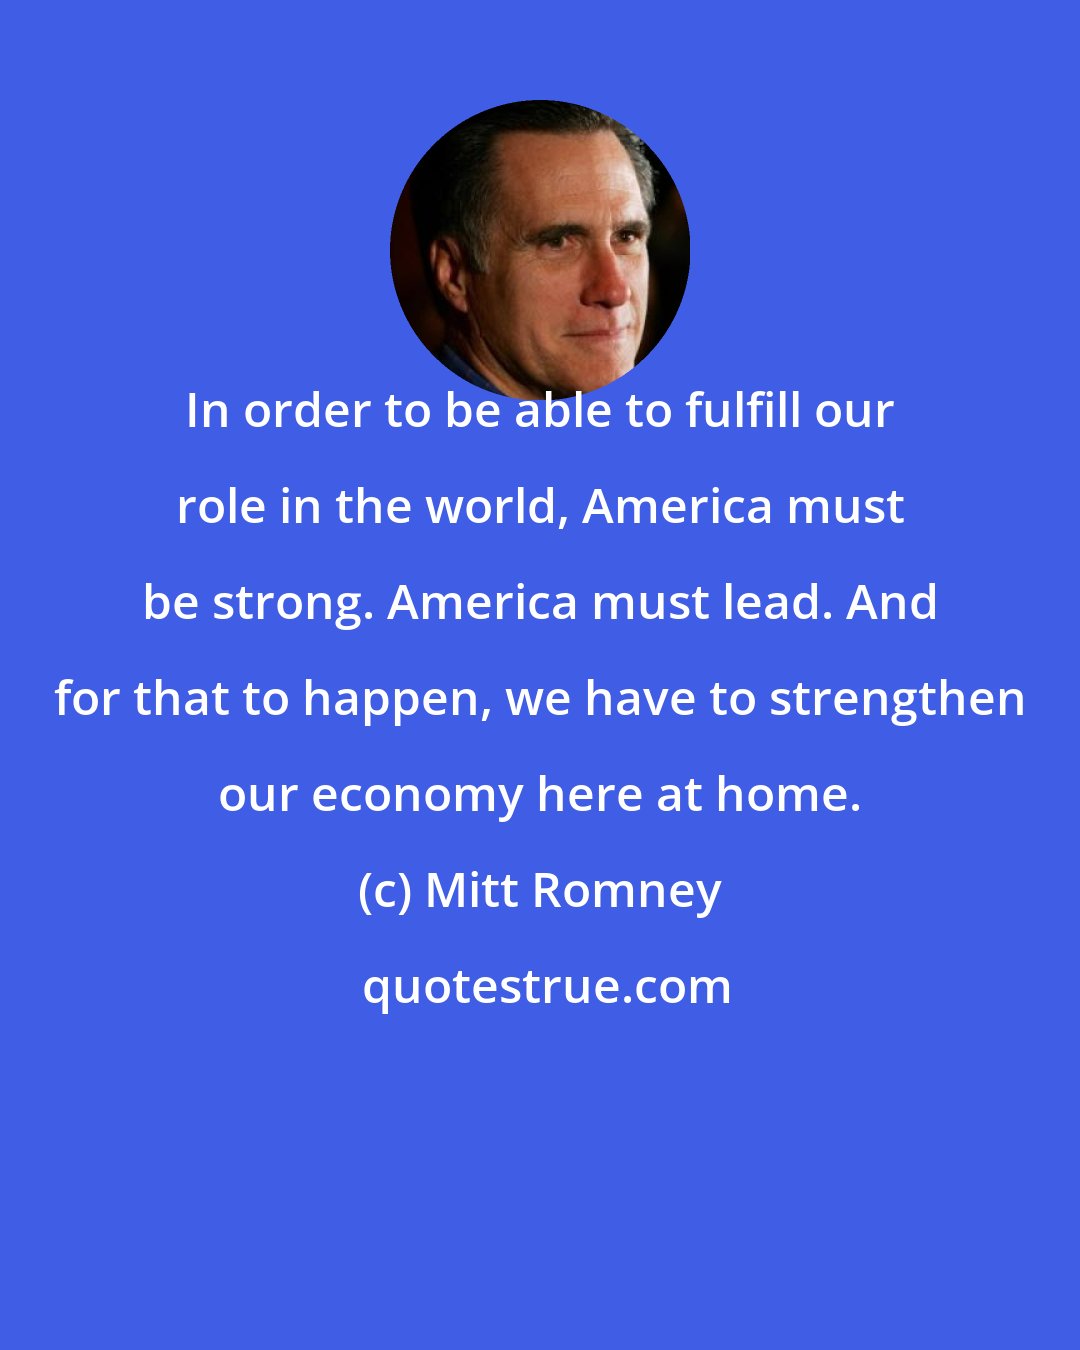 Mitt Romney: In order to be able to fulfill our role in the world, America must be strong. America must lead. And for that to happen, we have to strengthen our economy here at home.